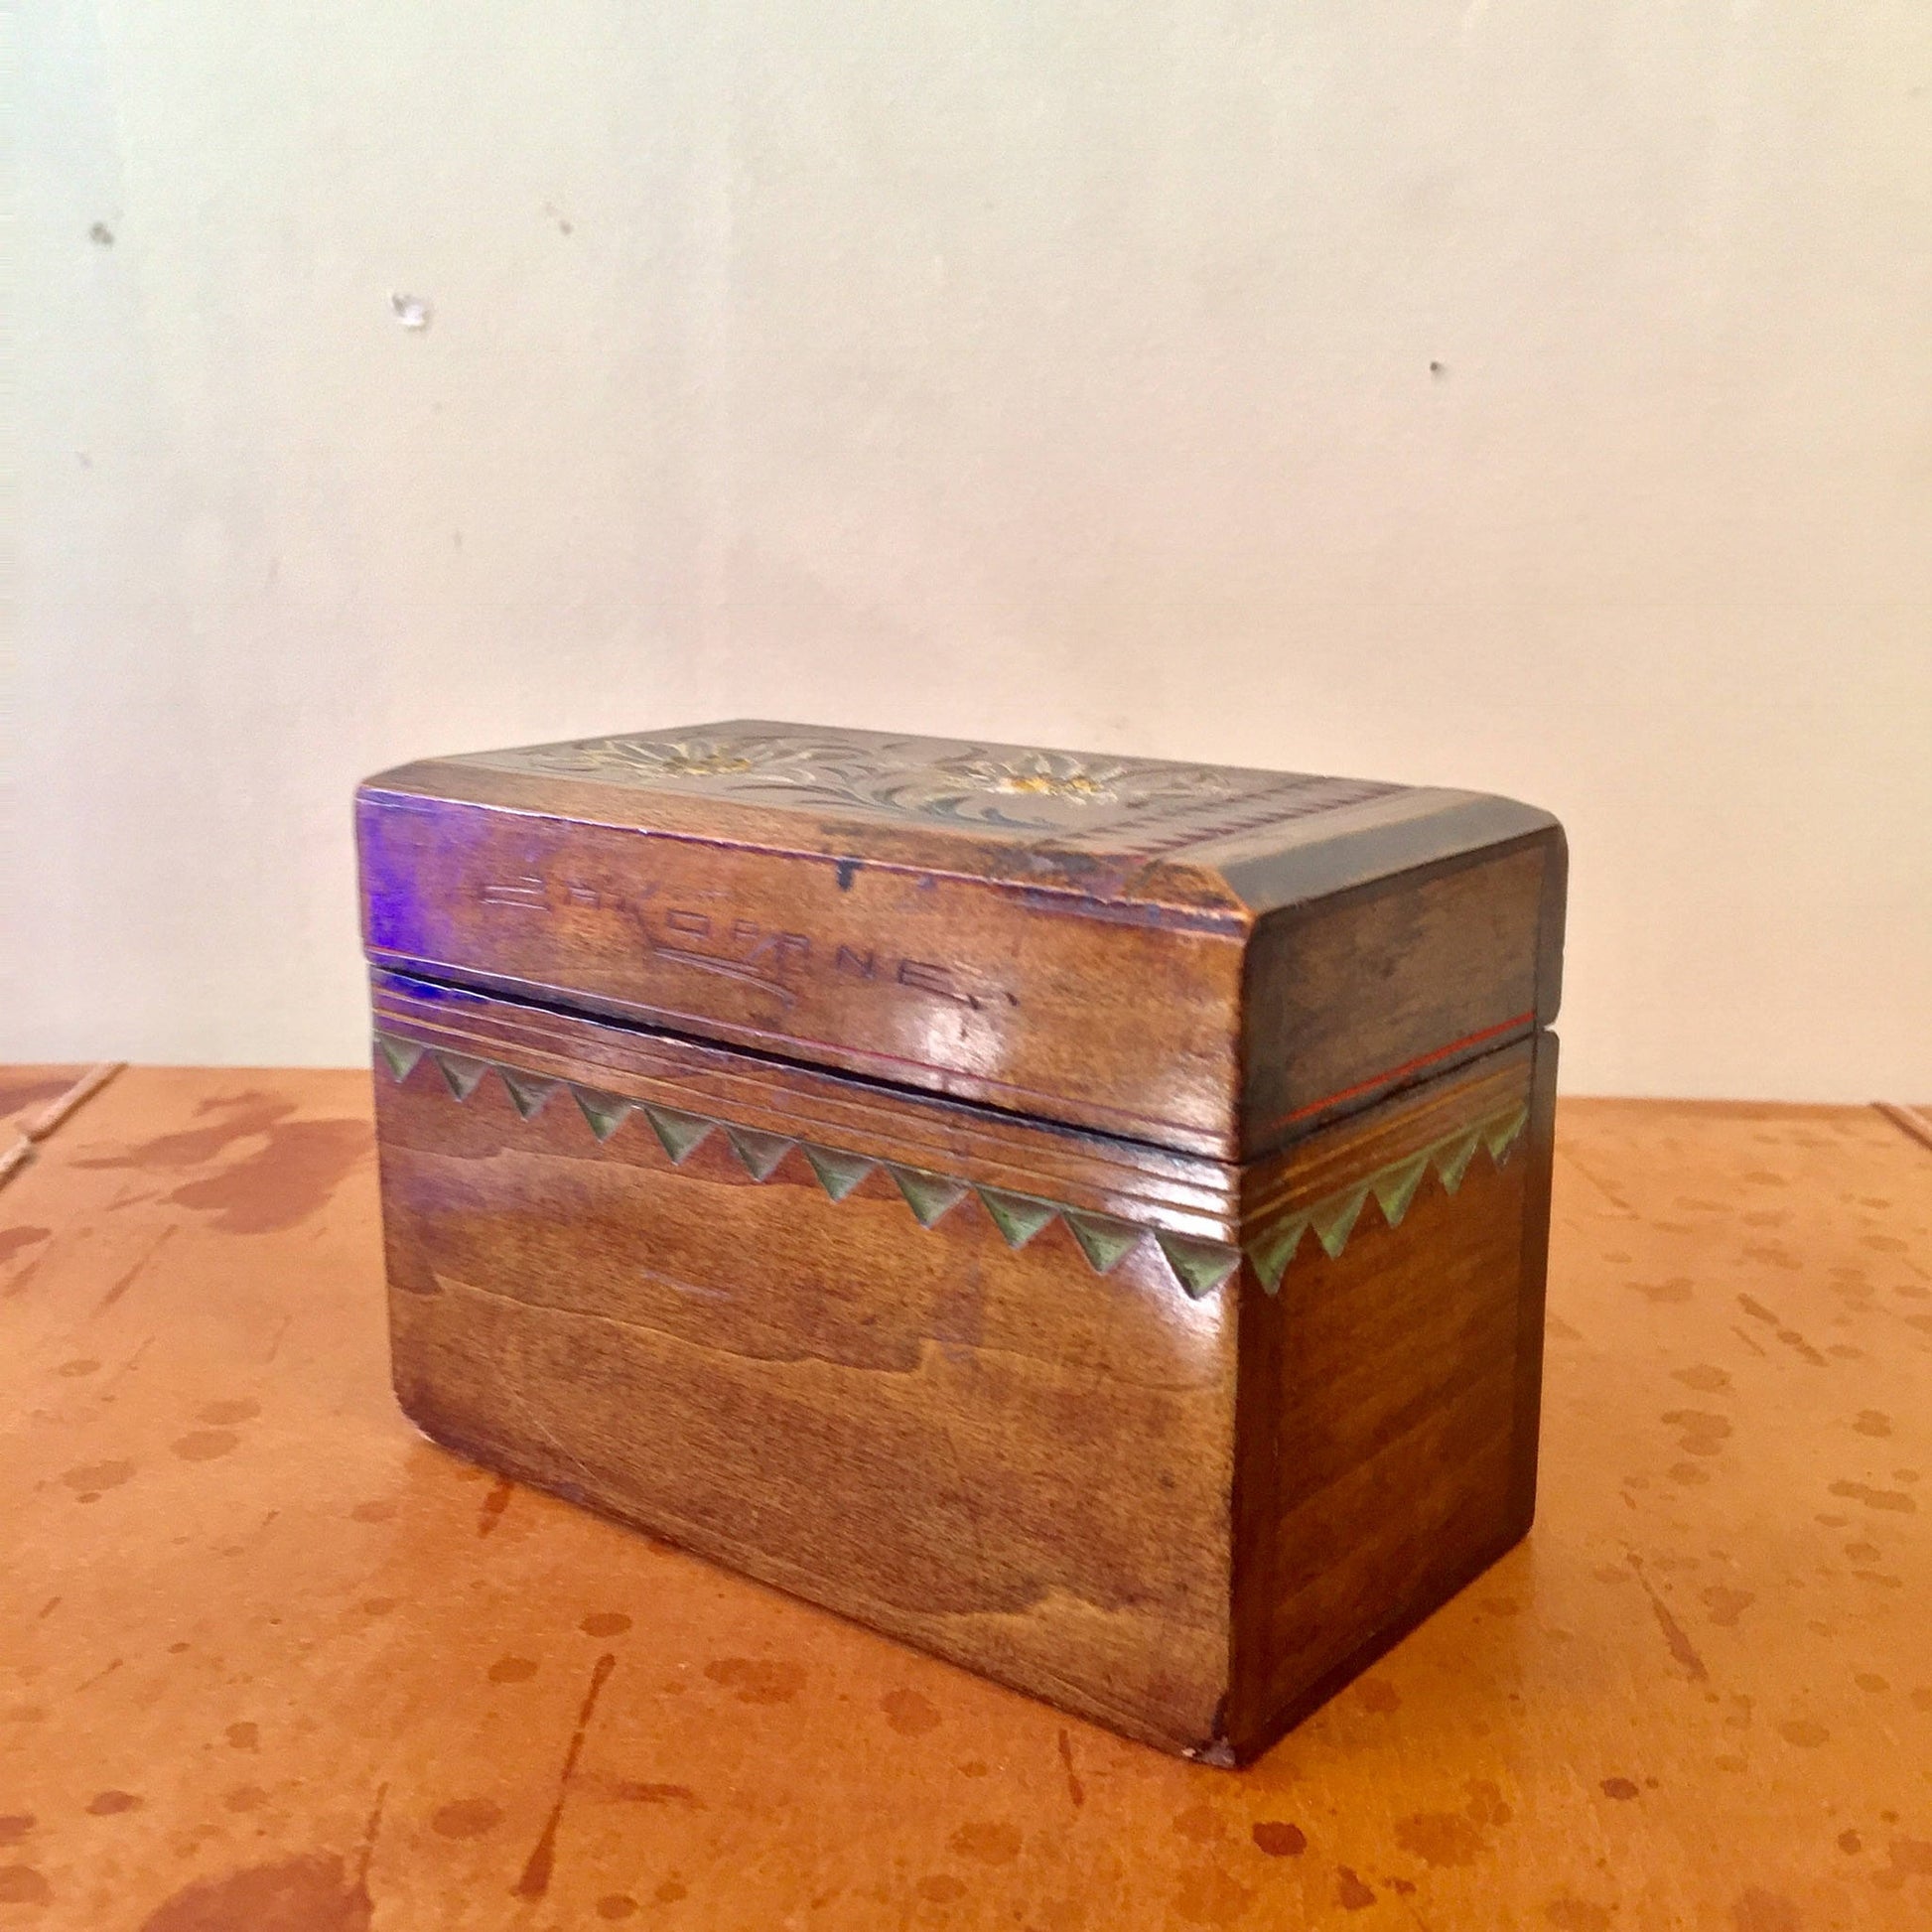 Antique wooden box with hand-carved floral designs and colorful painted accents, sitting on a rustic wooden surface.